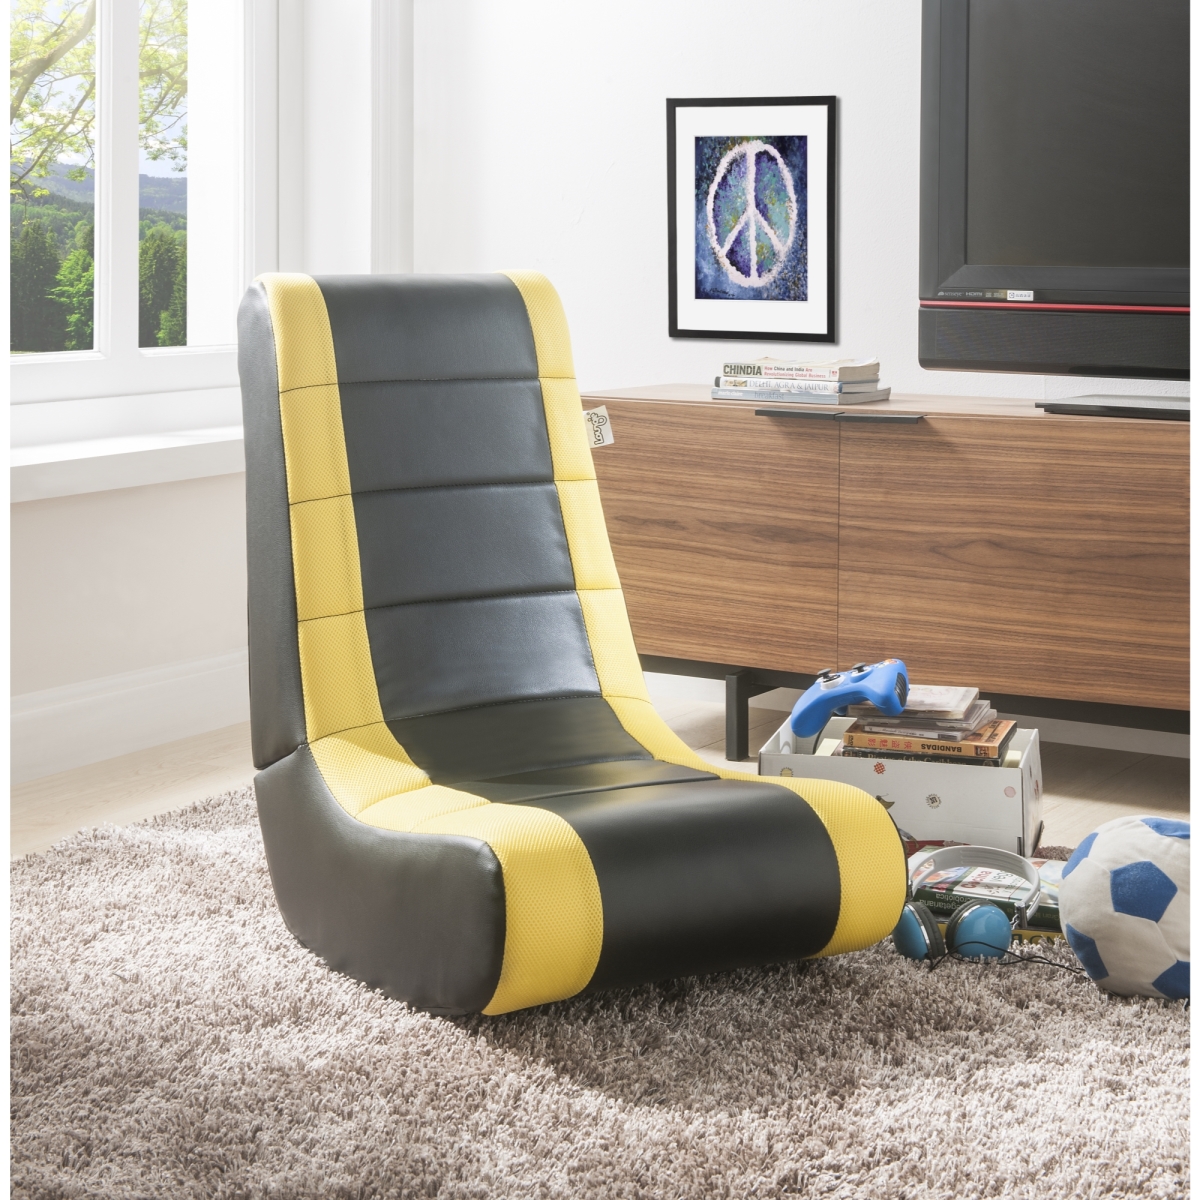 Rockme Video Gaming Rocker Chair For Kids Teens Adults & Boys Or Girls - Black With Yellow